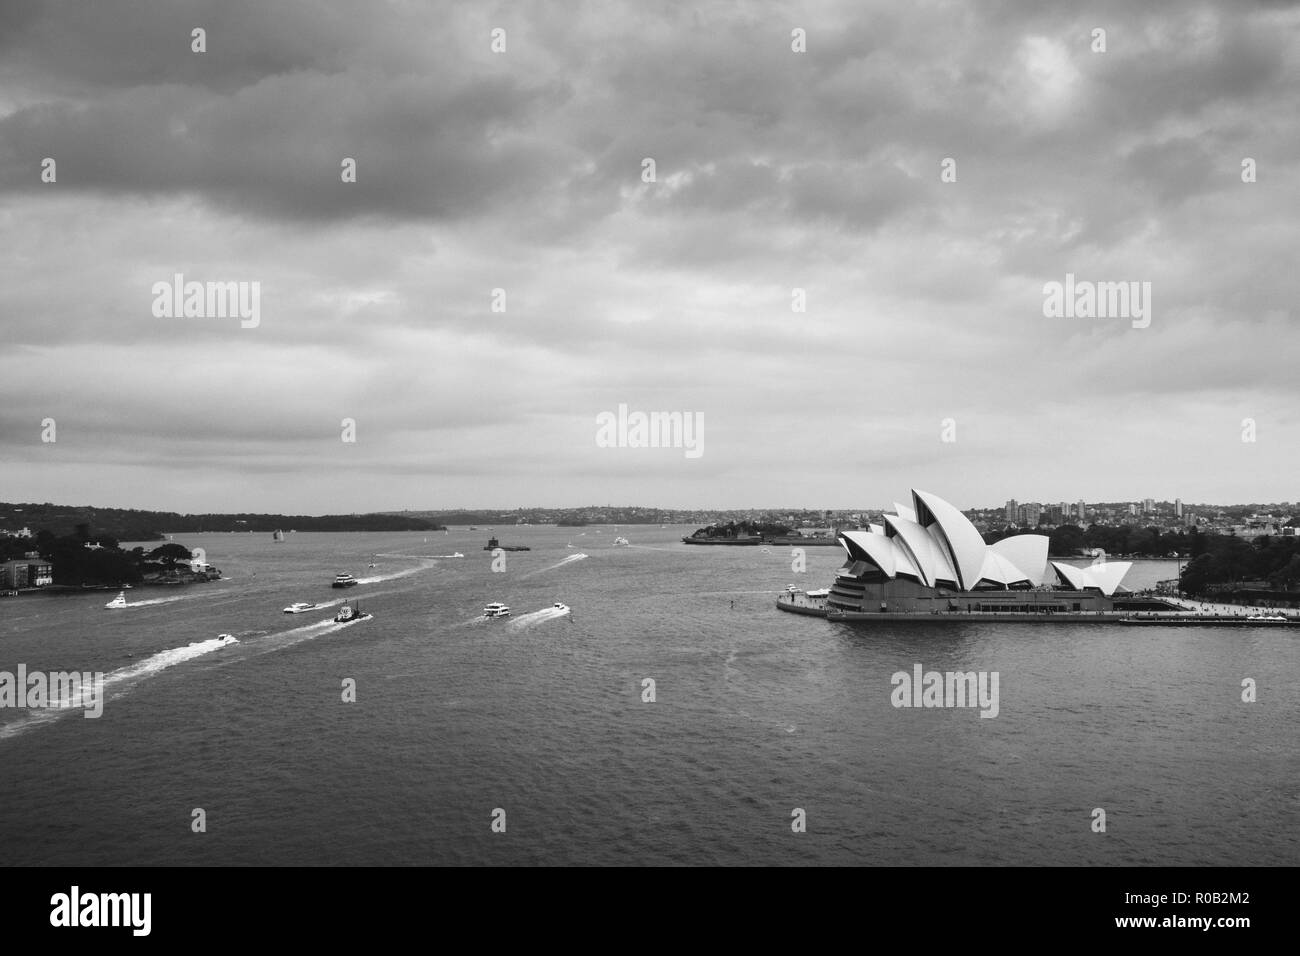 Sydney Harbour with iconic Sydney Opera House in view, Sydney, New South Wales, Australia Stock Photo